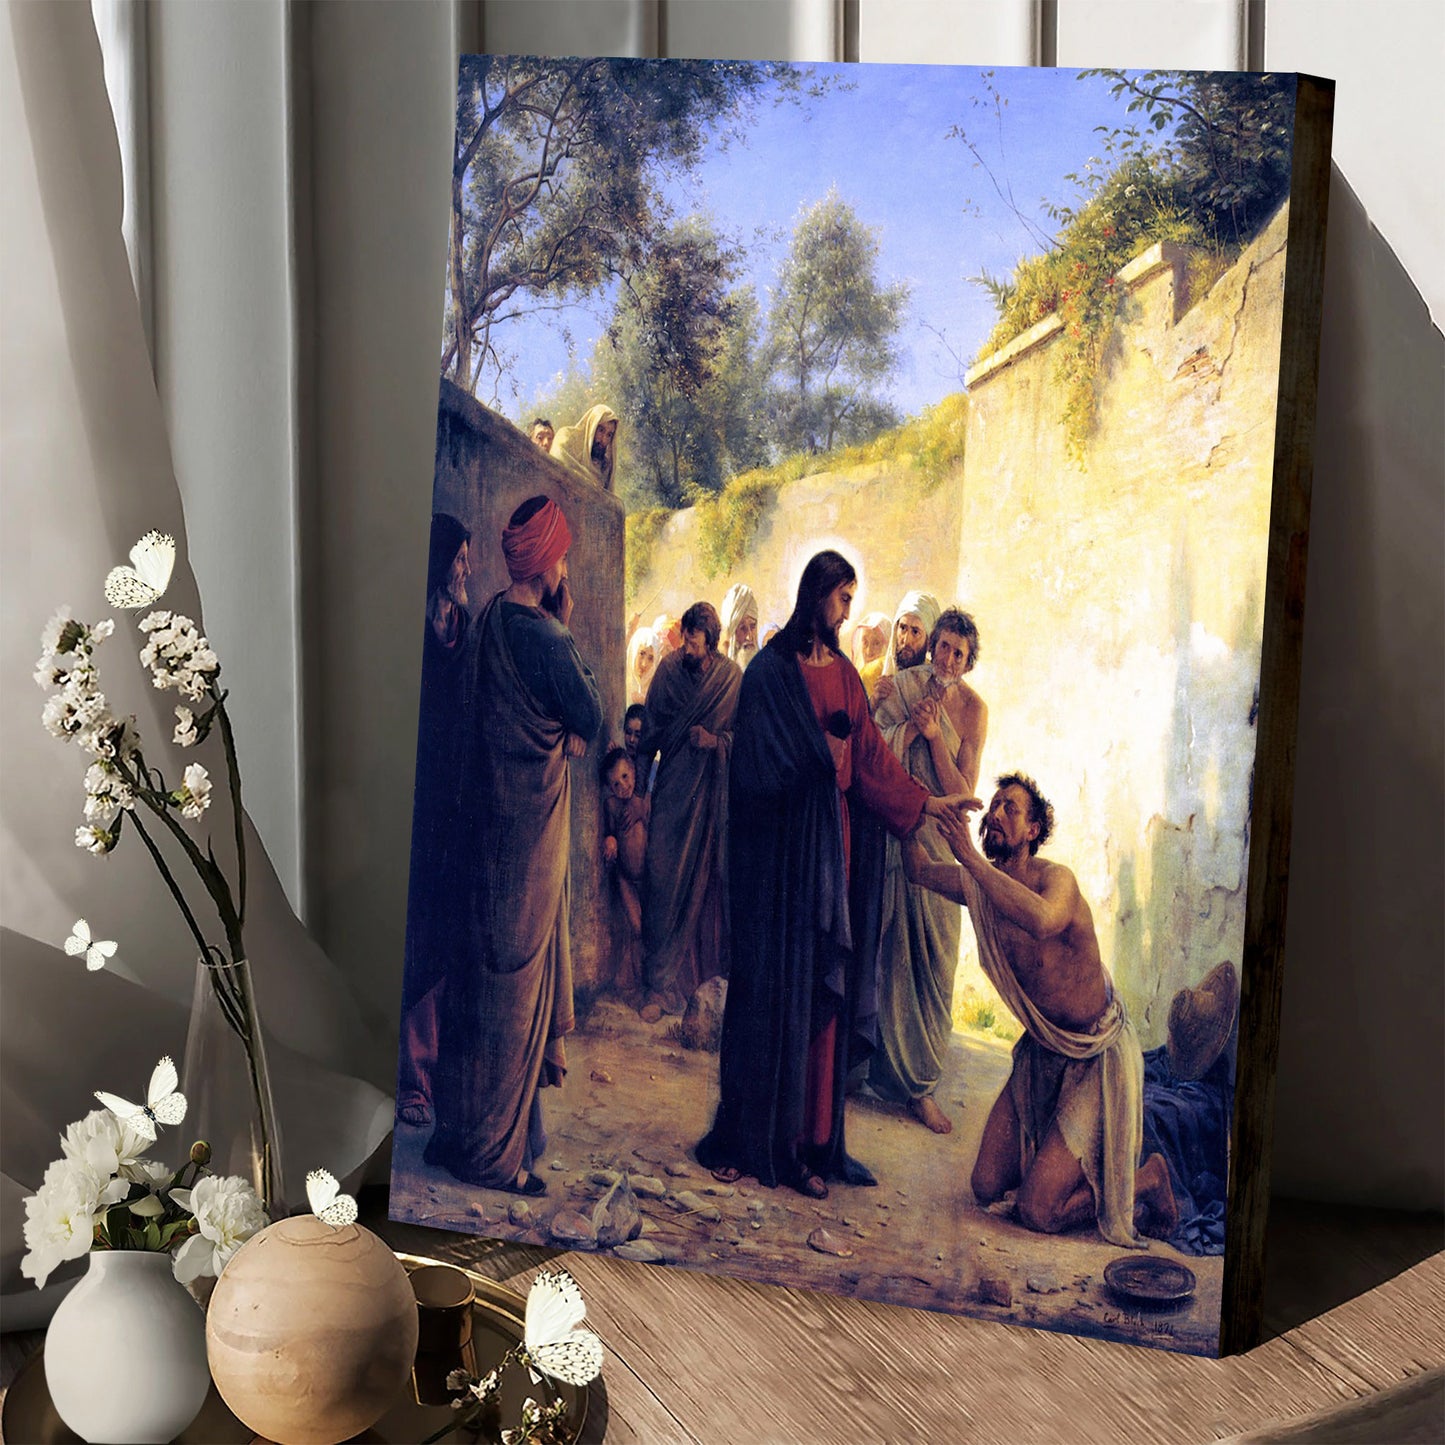 Healing Of The Blind Man By Jesus Christ Canvas Picture - Jesus Christ Canvas Art - Christian Wall Canvas